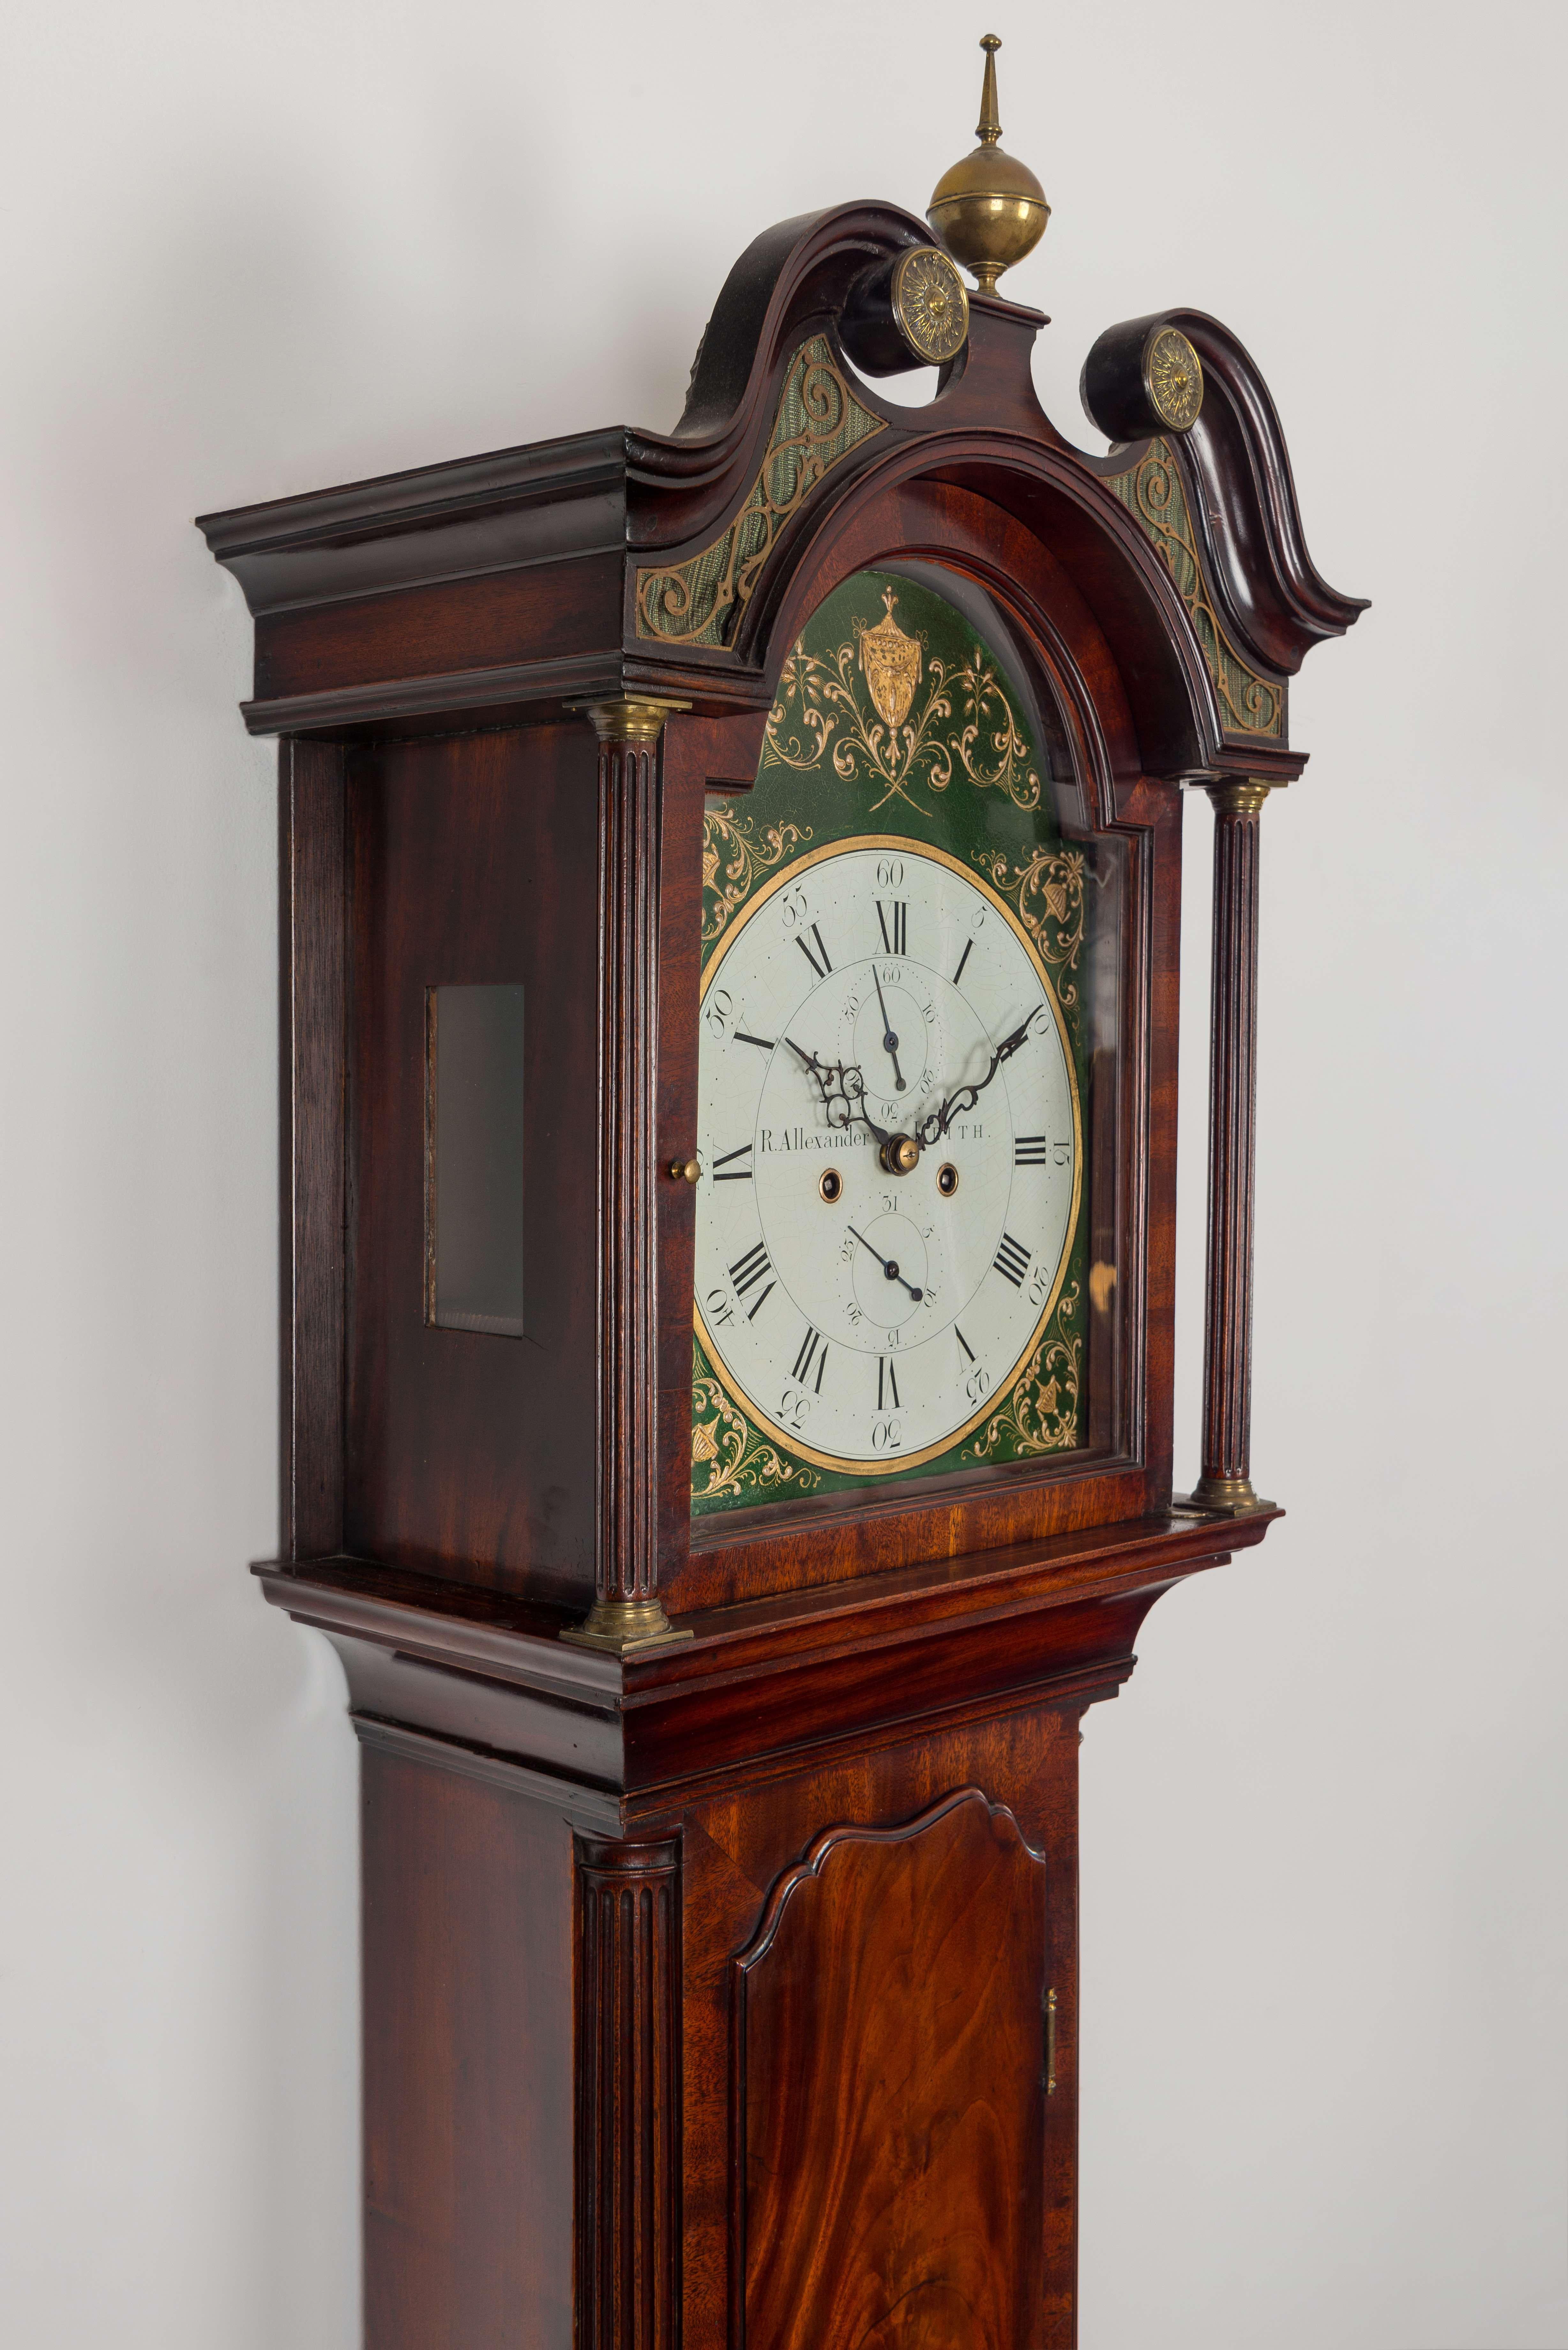 A superb antique mahogany Scottish longcase clock of classically elegant and restrained proportions, so typical of the best Edinburgh makers. The arched, signed painted dial has central seconds and date indication within a gilt border, the corners